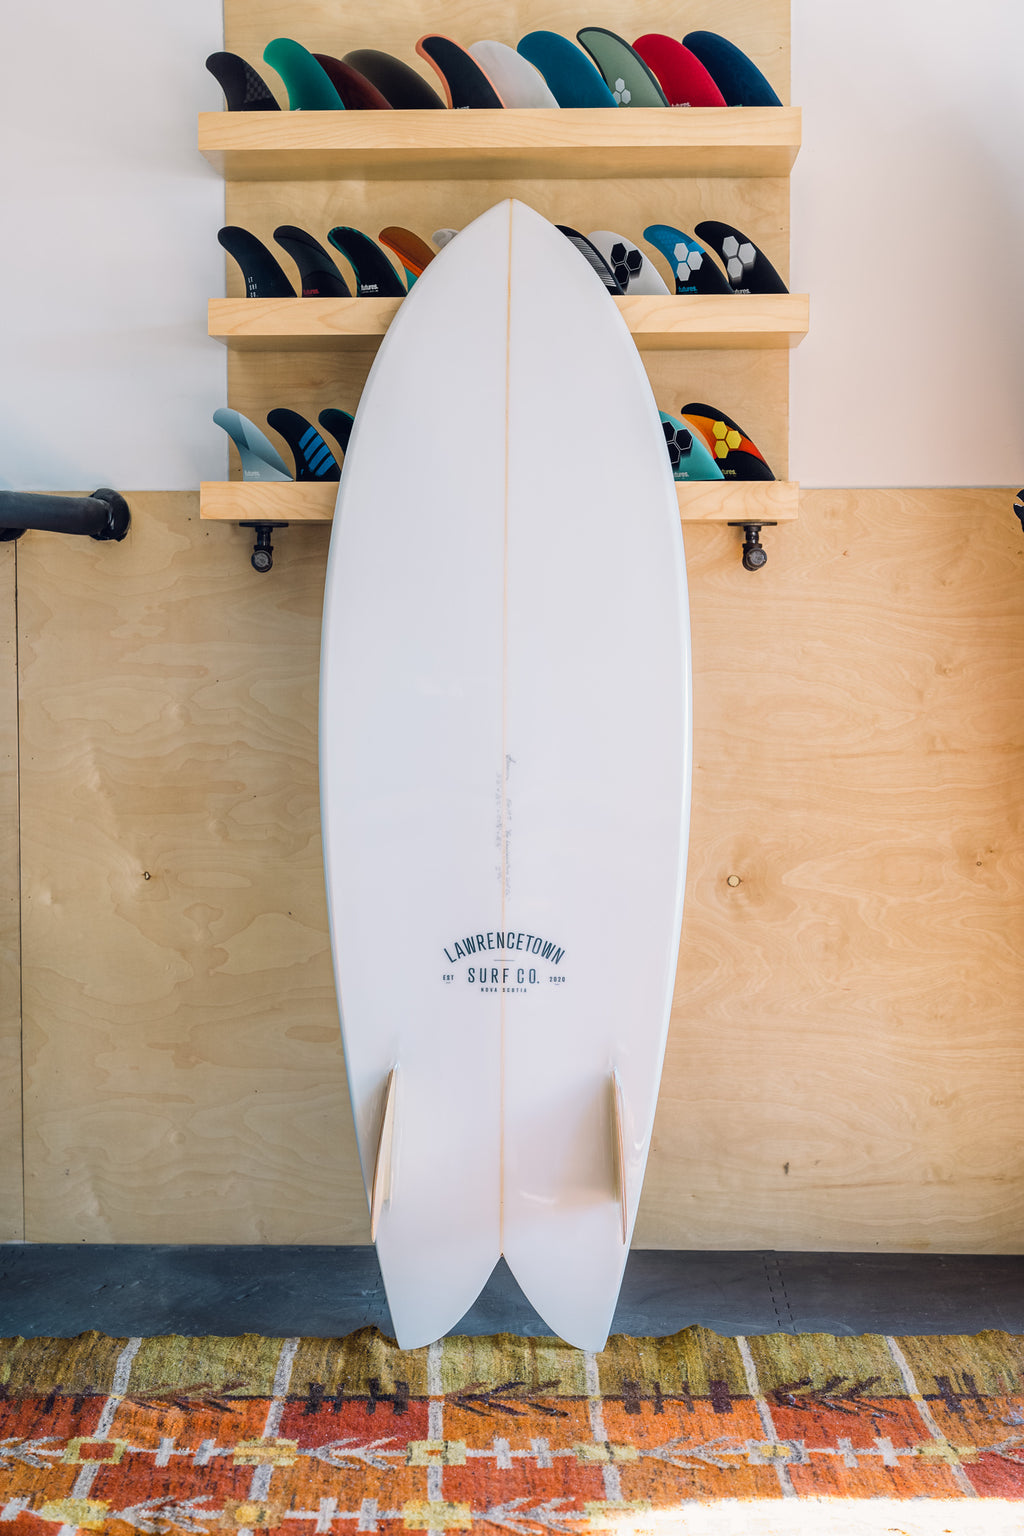 Lawrencetown Surf Co. - 5'9" Keel Fish